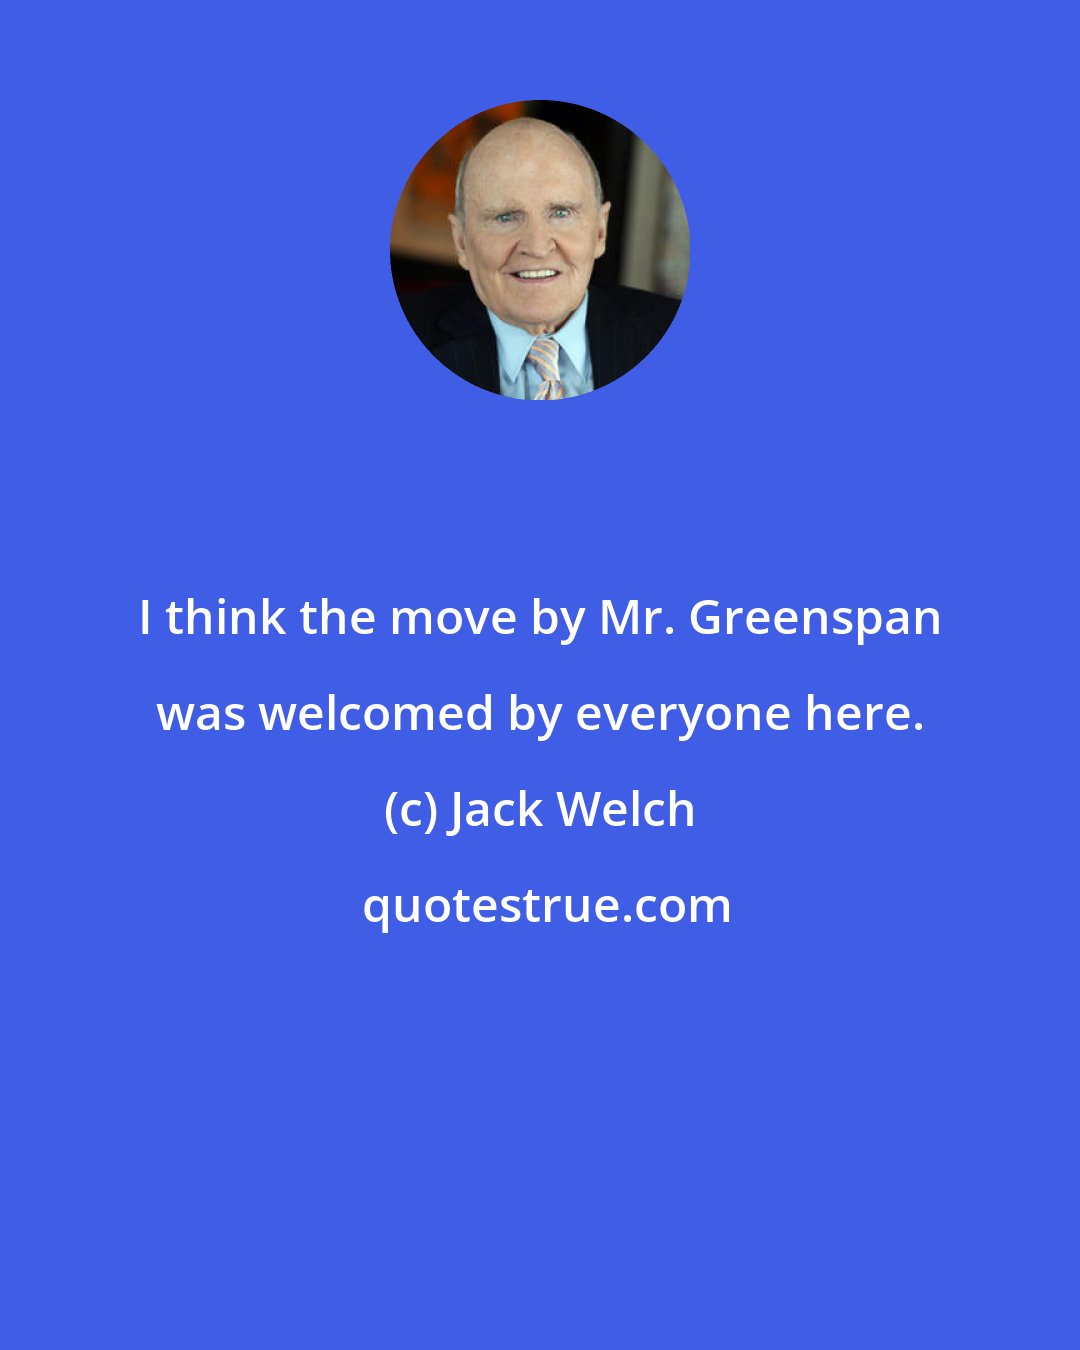 Jack Welch: I think the move by Mr. Greenspan was welcomed by everyone here.